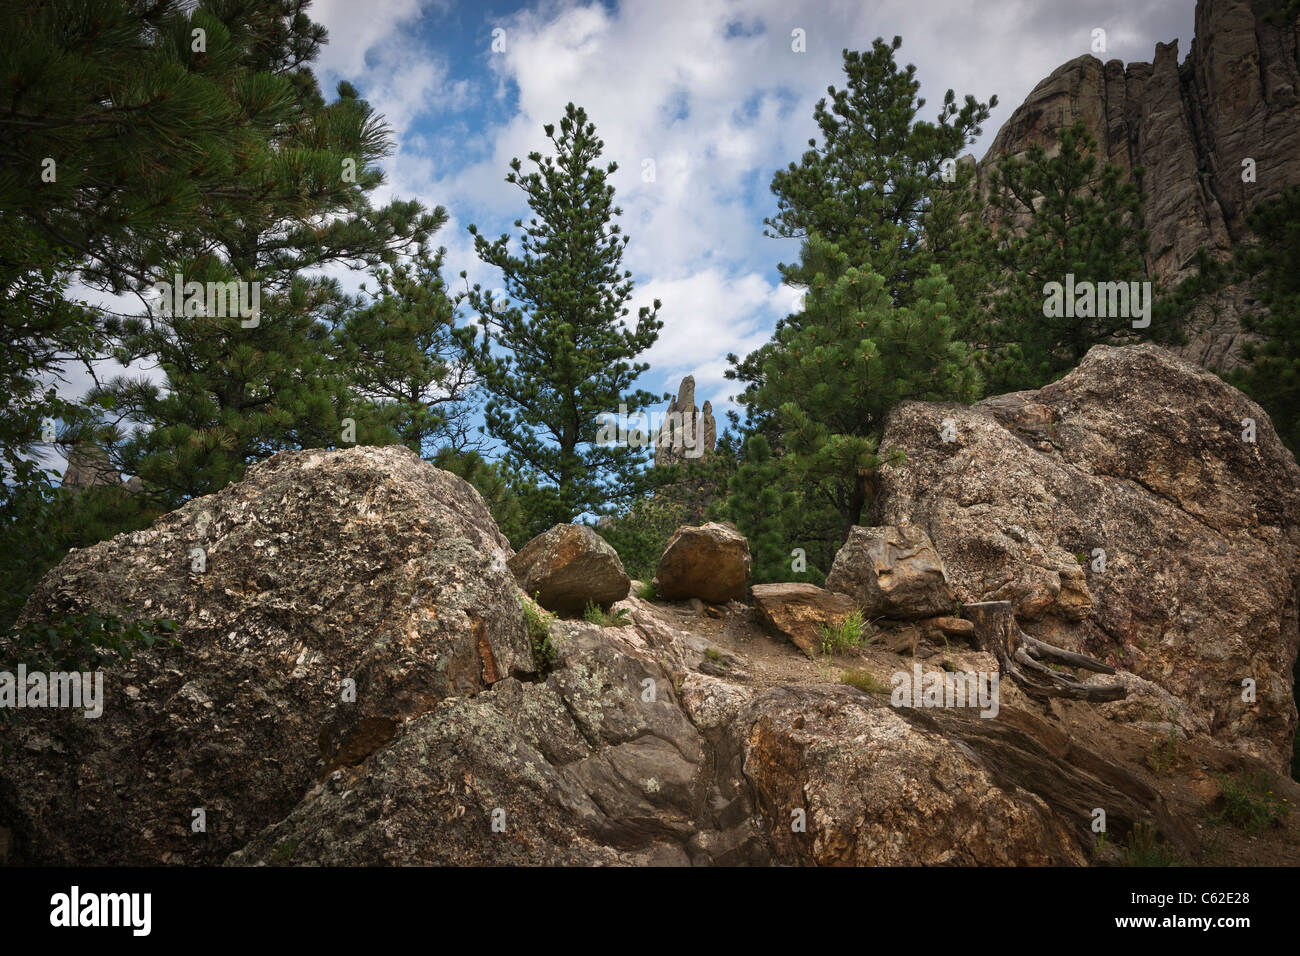 Scenic pine and spruce covered mountains landscape view in Black Hills in South Dakota Stock Photo